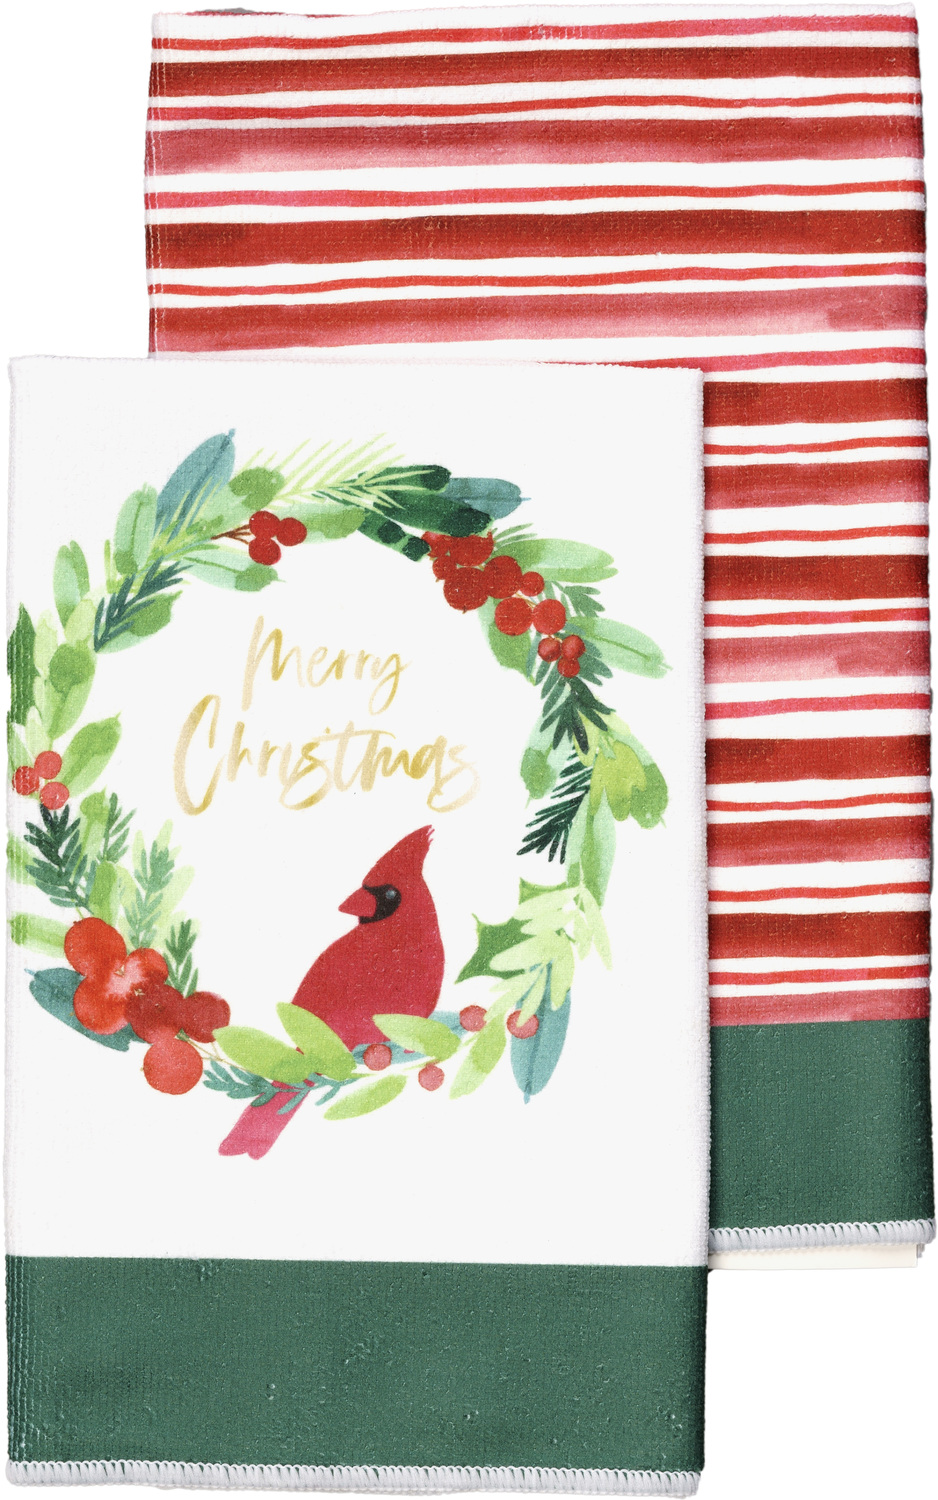 Merry Christmas by Cheers to the Holidays - Merry Christmas - Tea Towel Gift Set
(2 - 19.75" x 27.5")